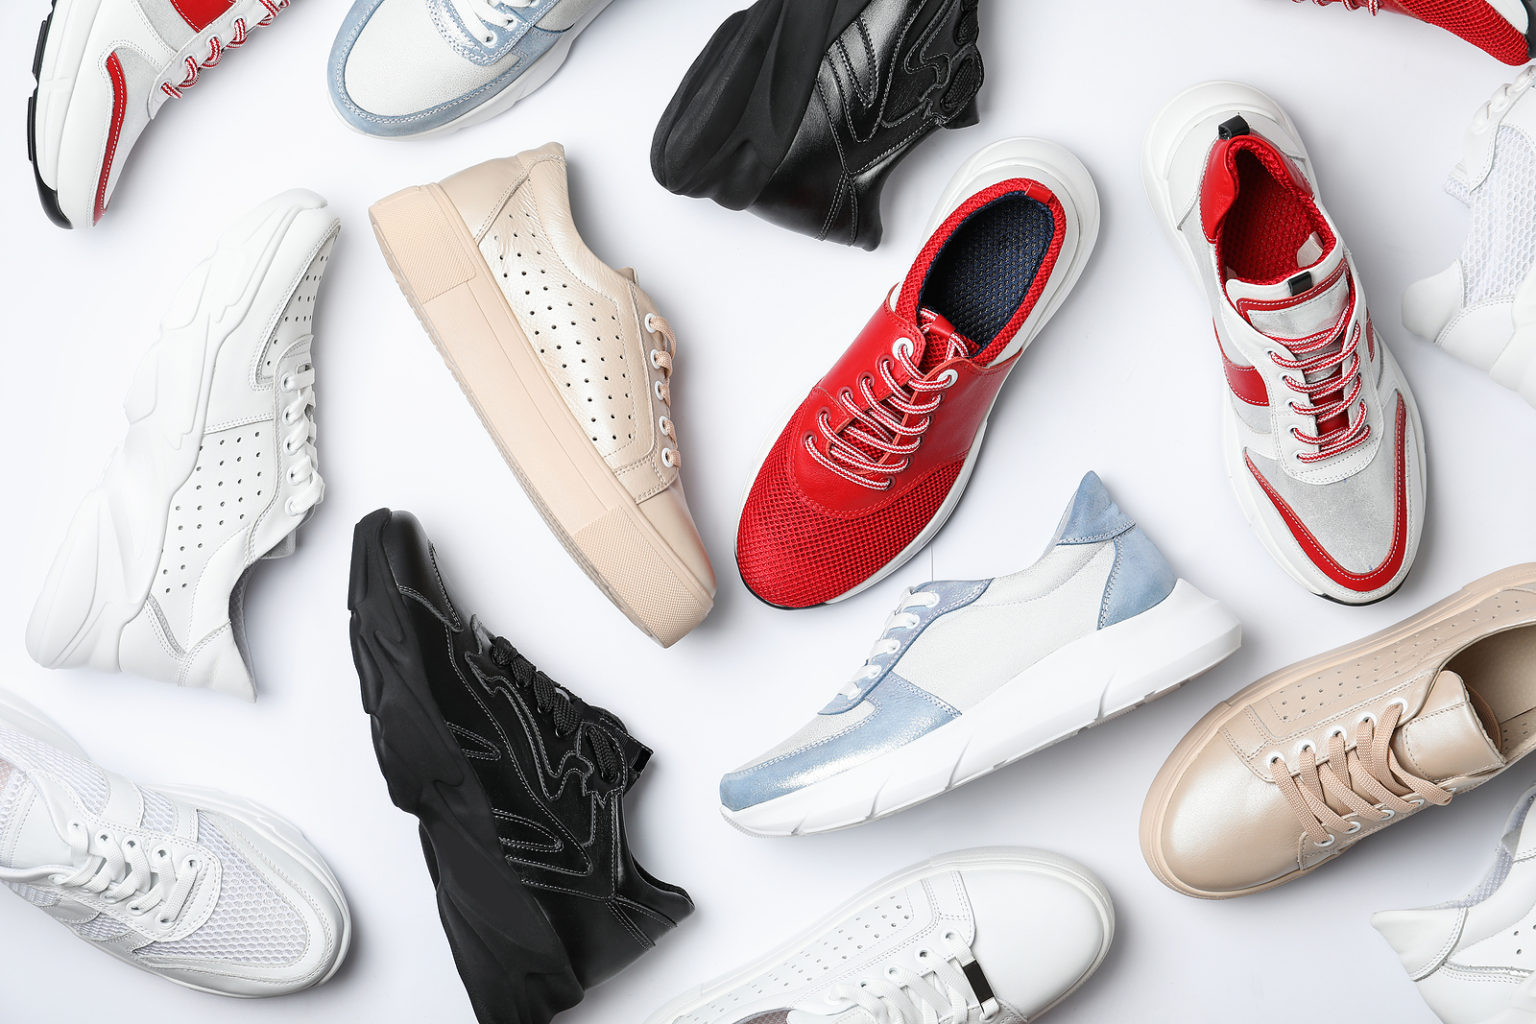 5 Luxury Sneaker Brands to Look Out for in 2021 | 300Magazine